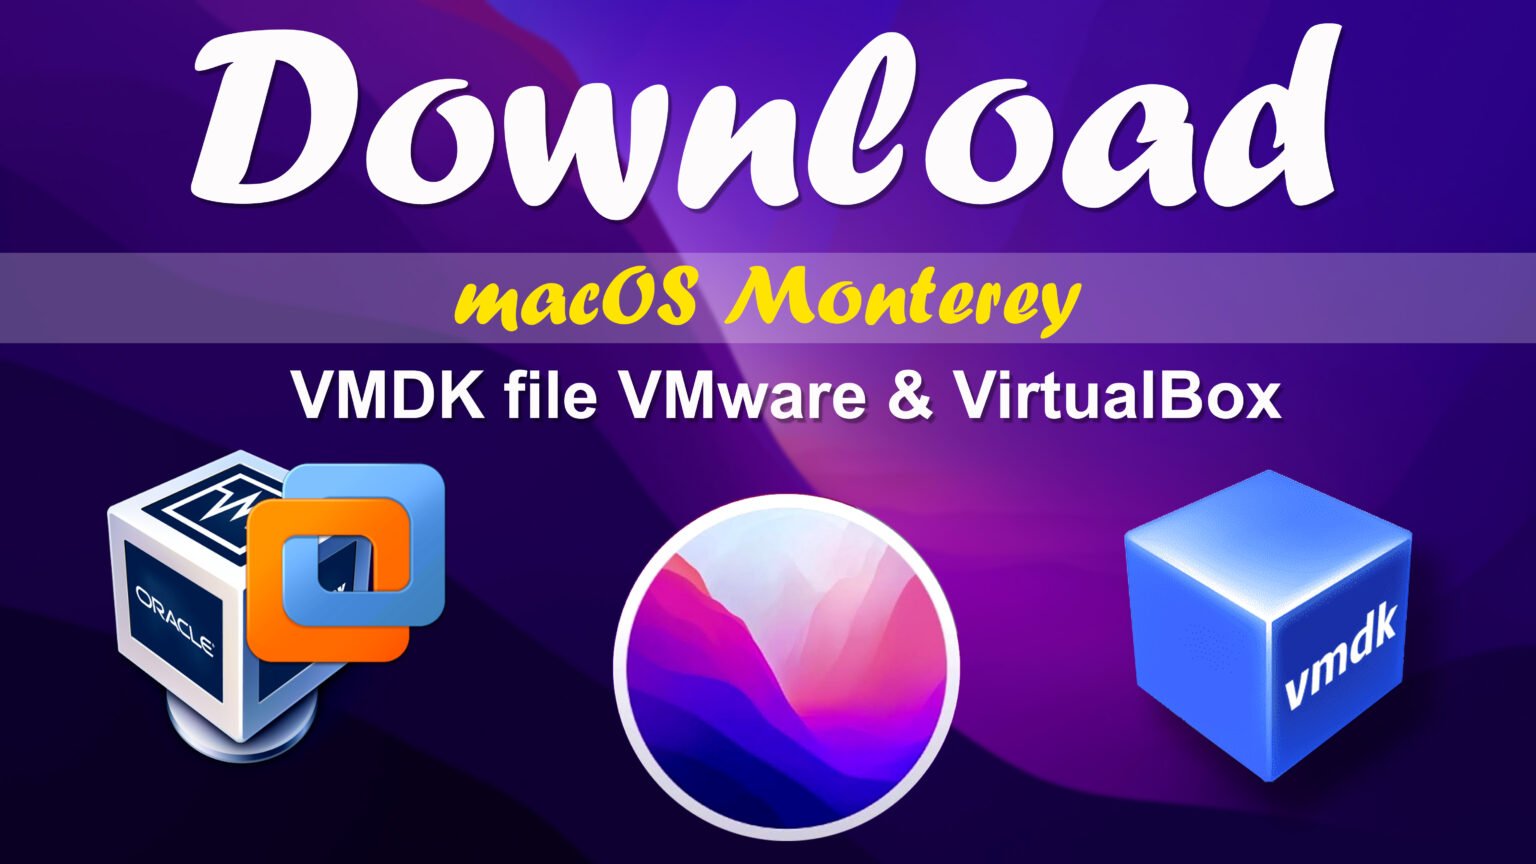 vmware image for mac os